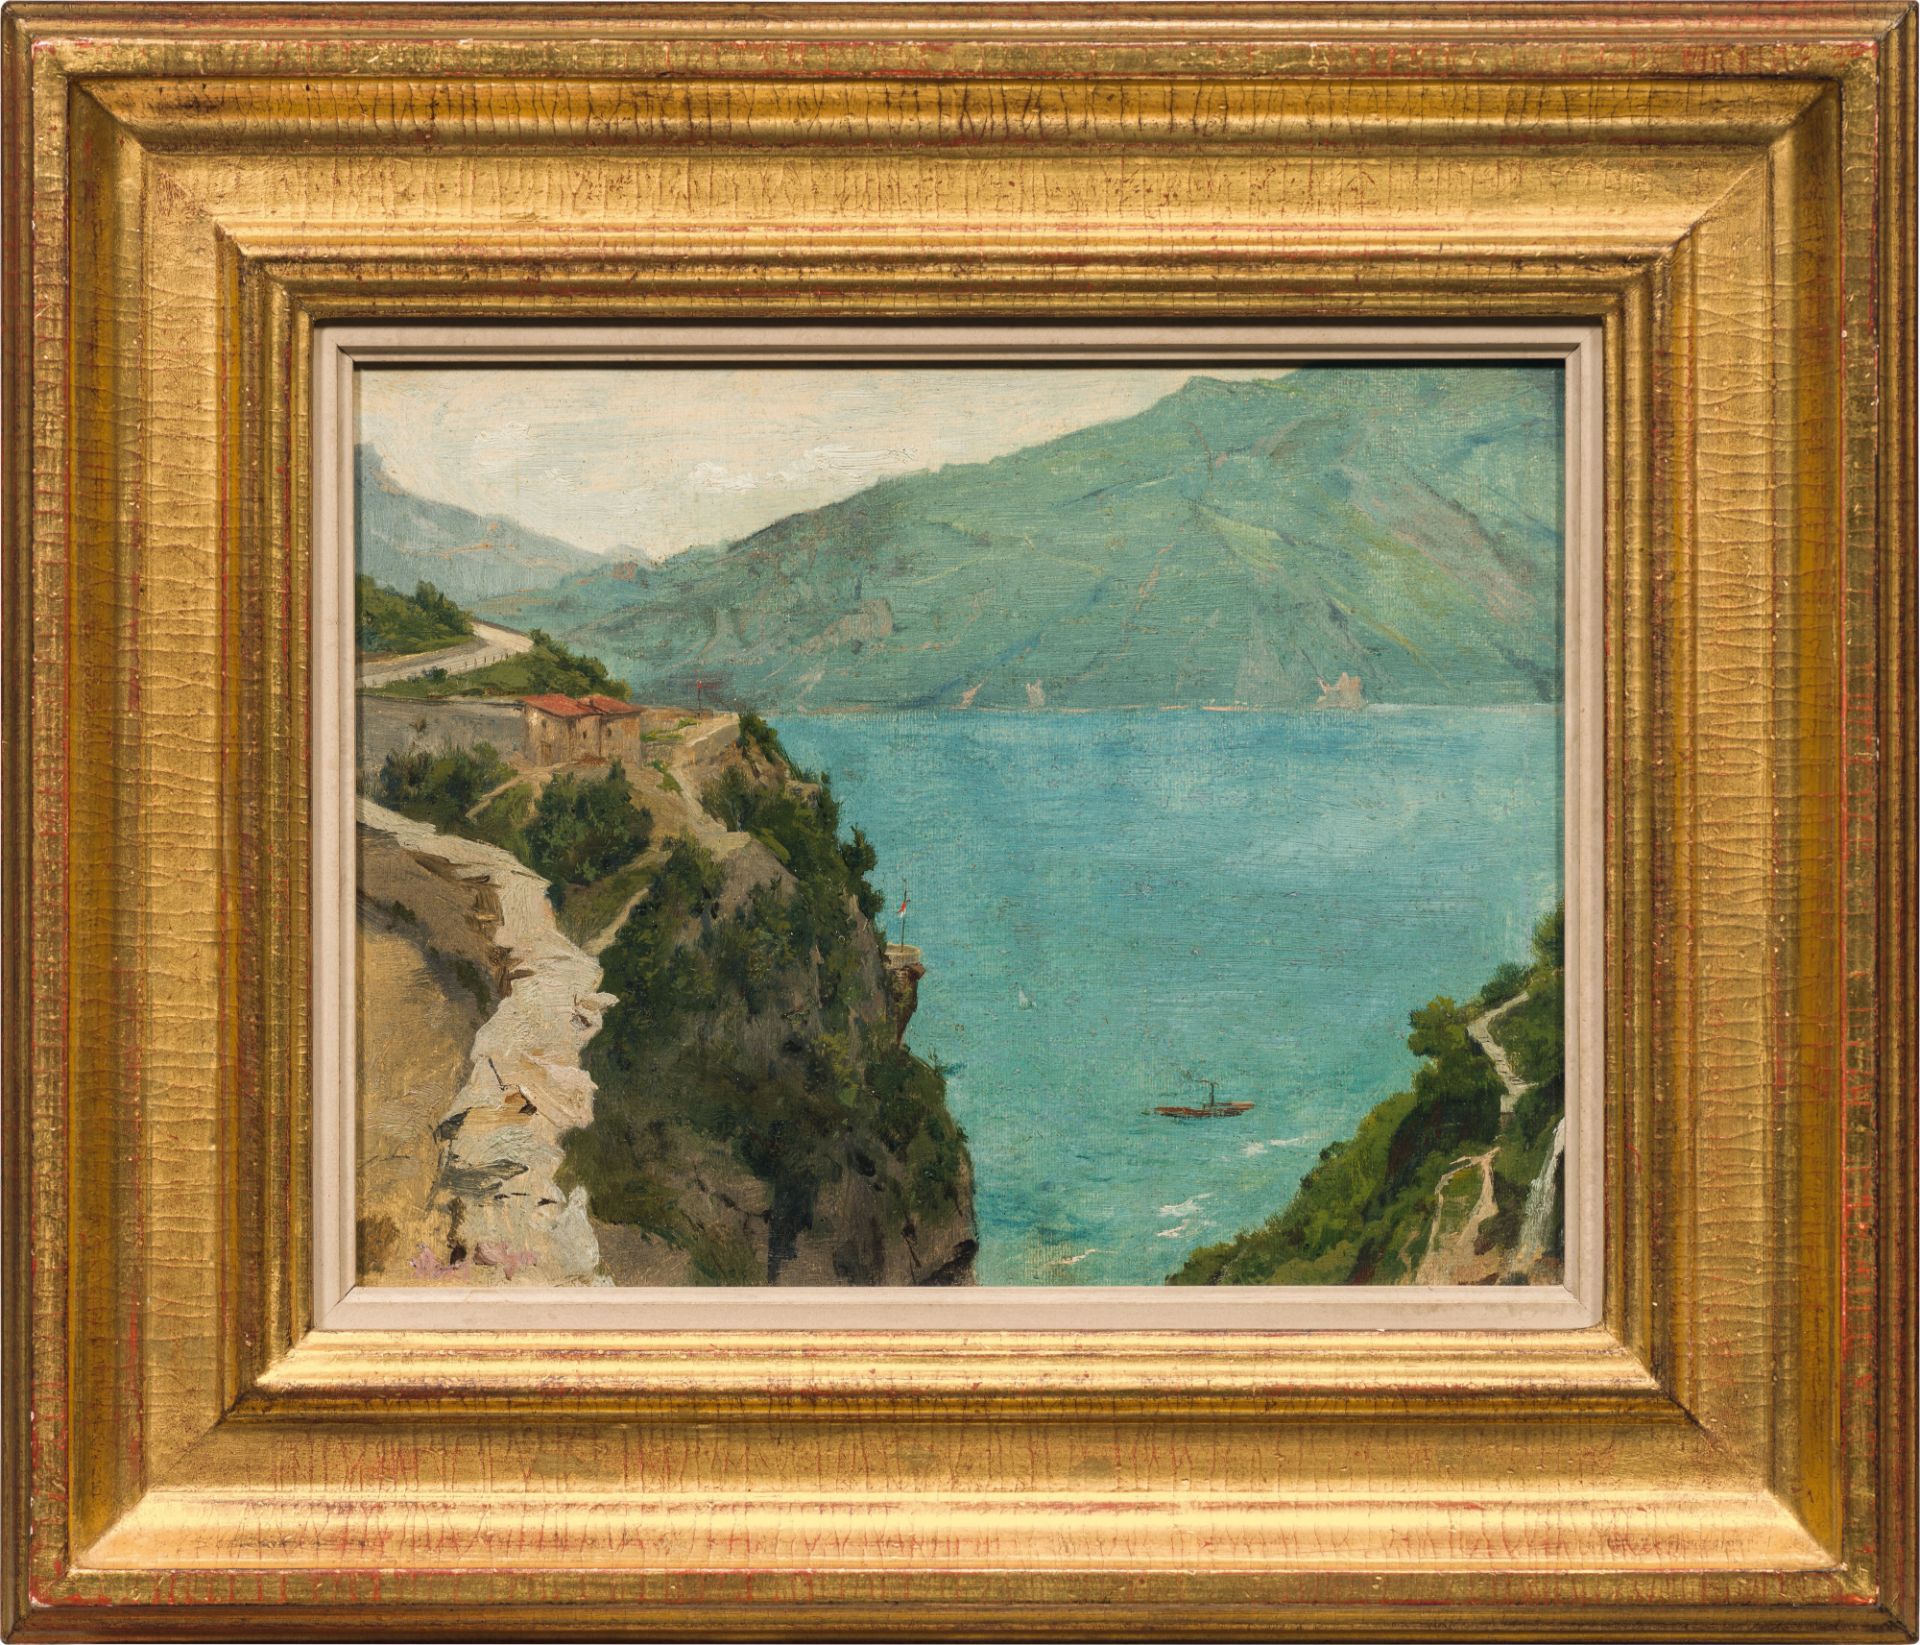 Emilie Mediz-Pelikan: the small steamer (view into the river valley, Isonzo?) - Image 2 of 2